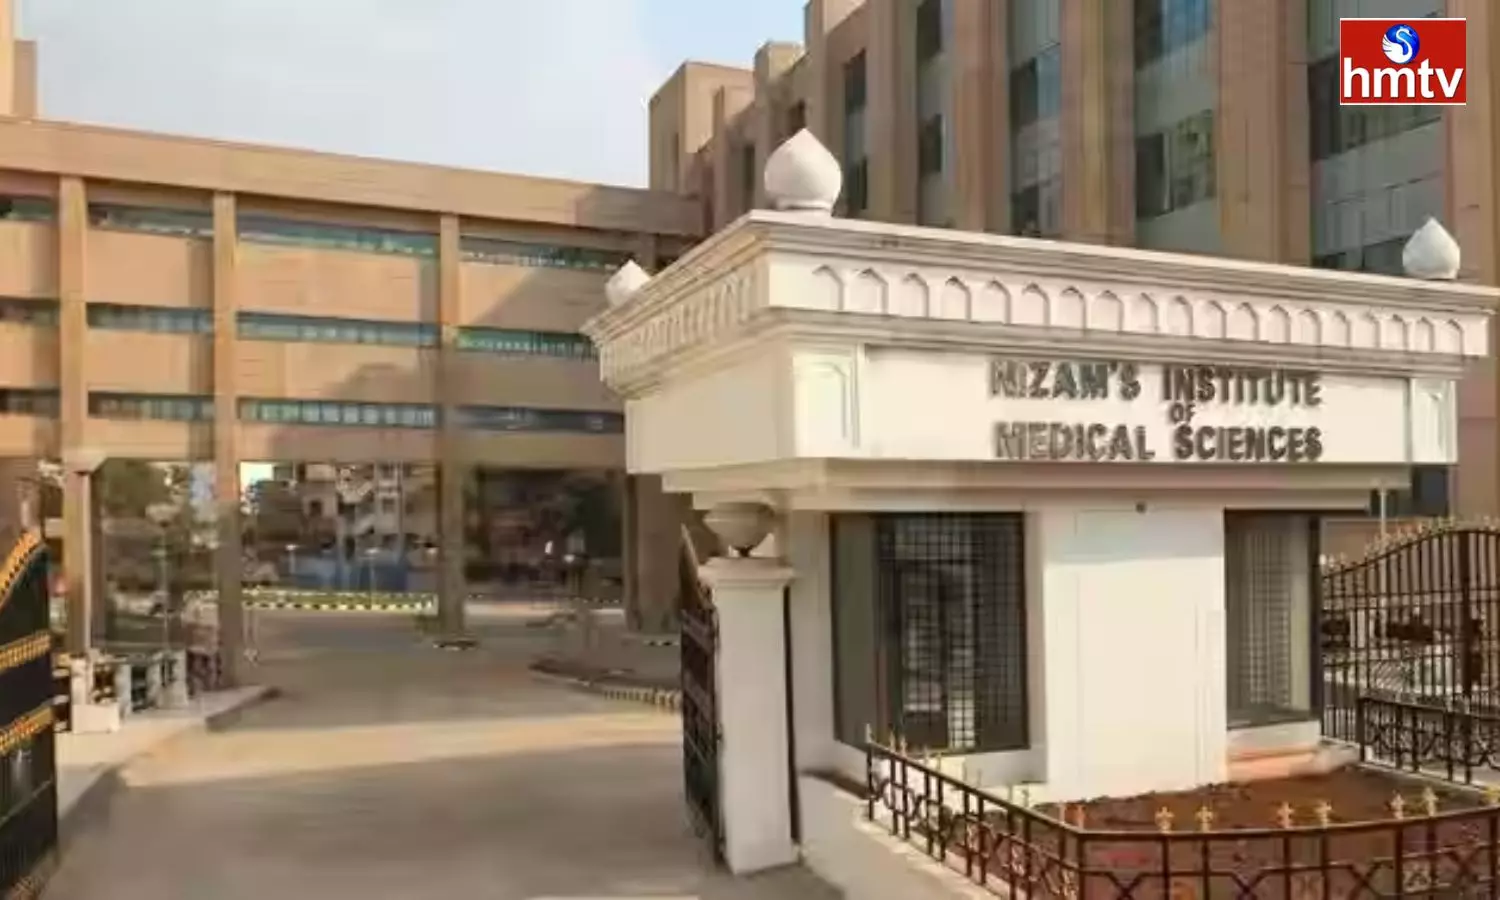 Panjagutta NIMS Hospital has Holiday on 9th of this Month